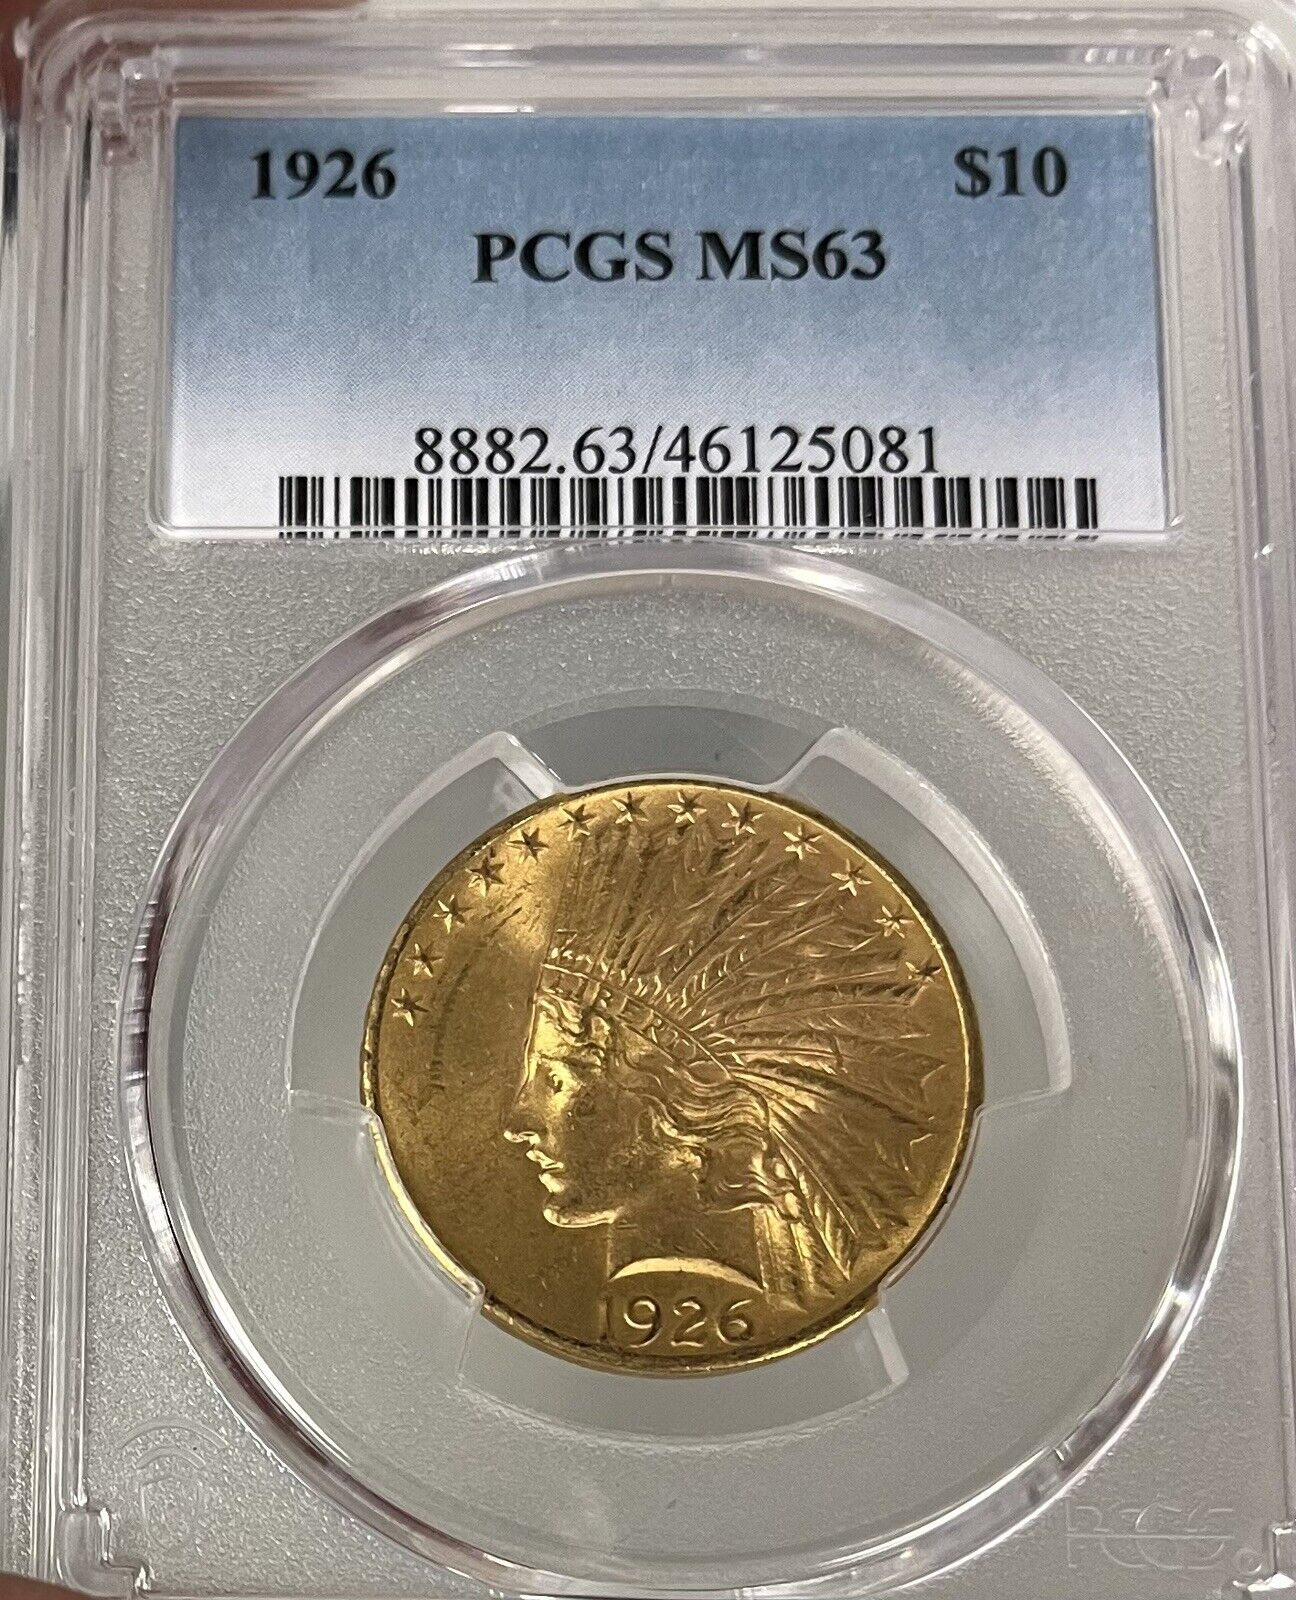 1926 Pcgs Ms63 $10 Indian Gold Eagle